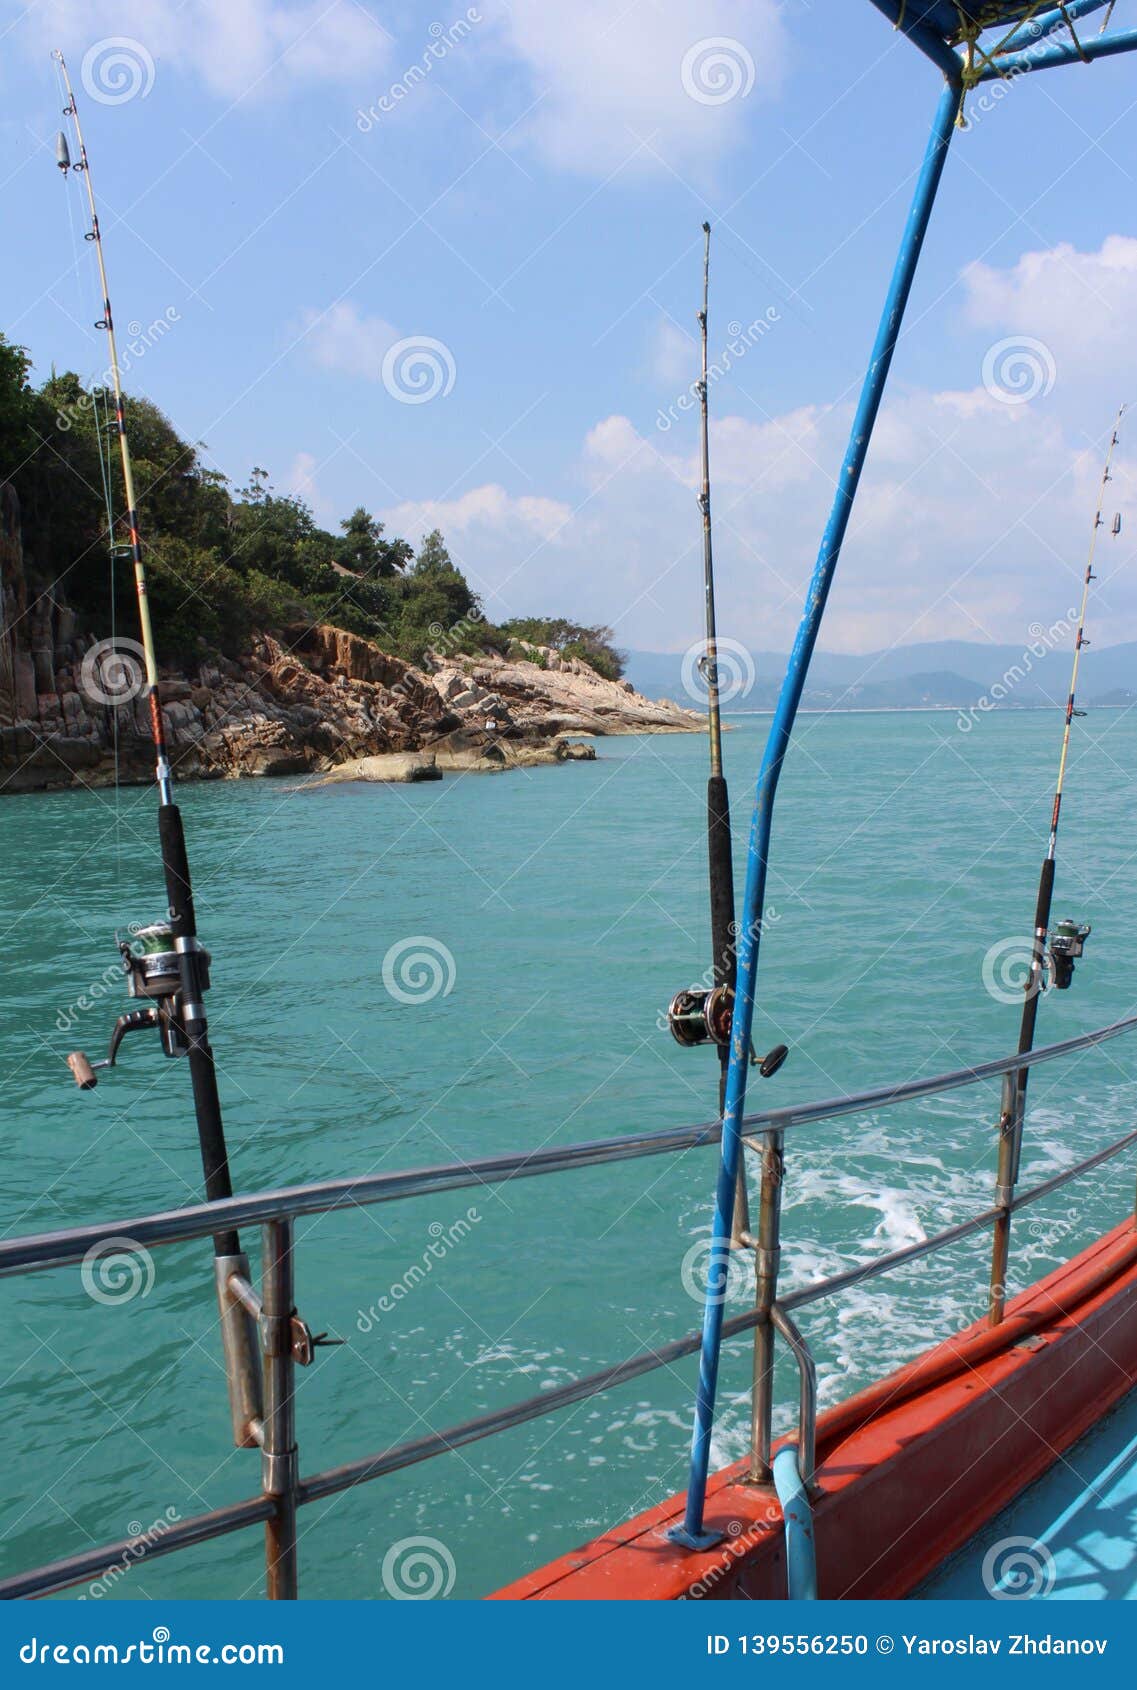 Fishing in the Pacific Ocean on a Boat with Fishing Rods Stock